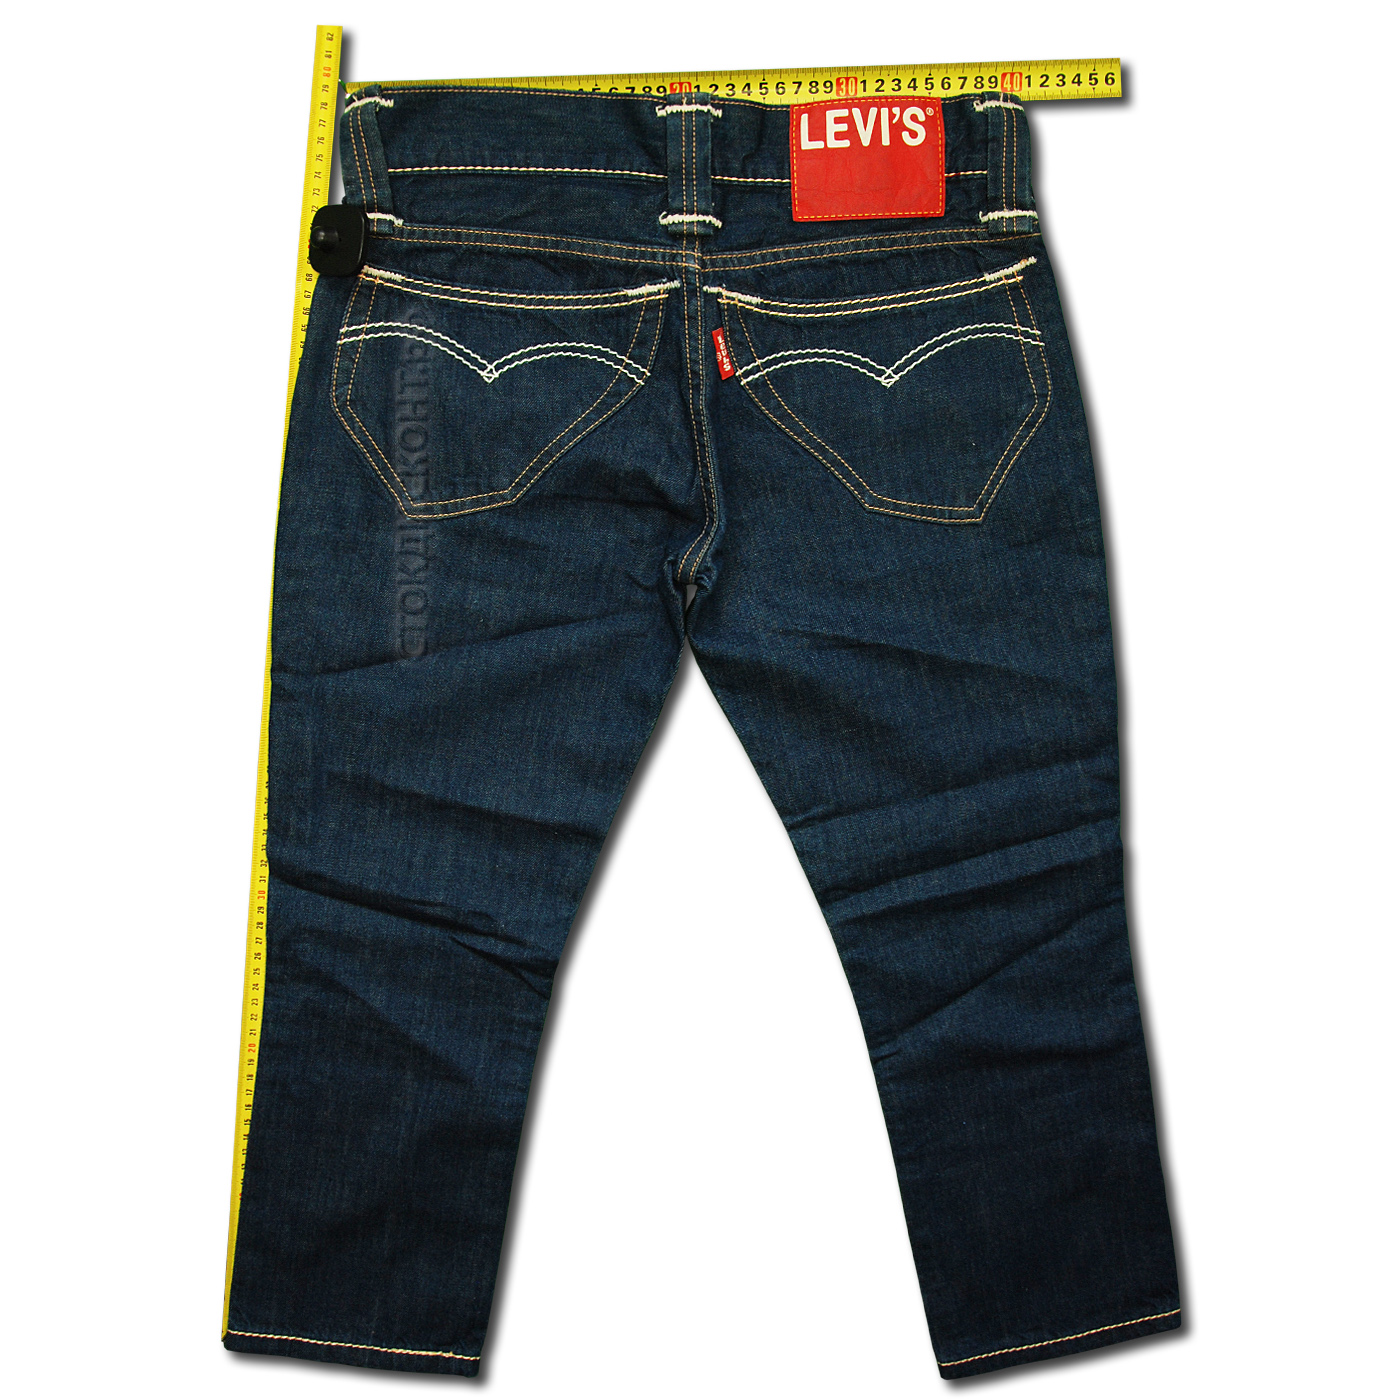 Levi's RED Brand Clothing USA